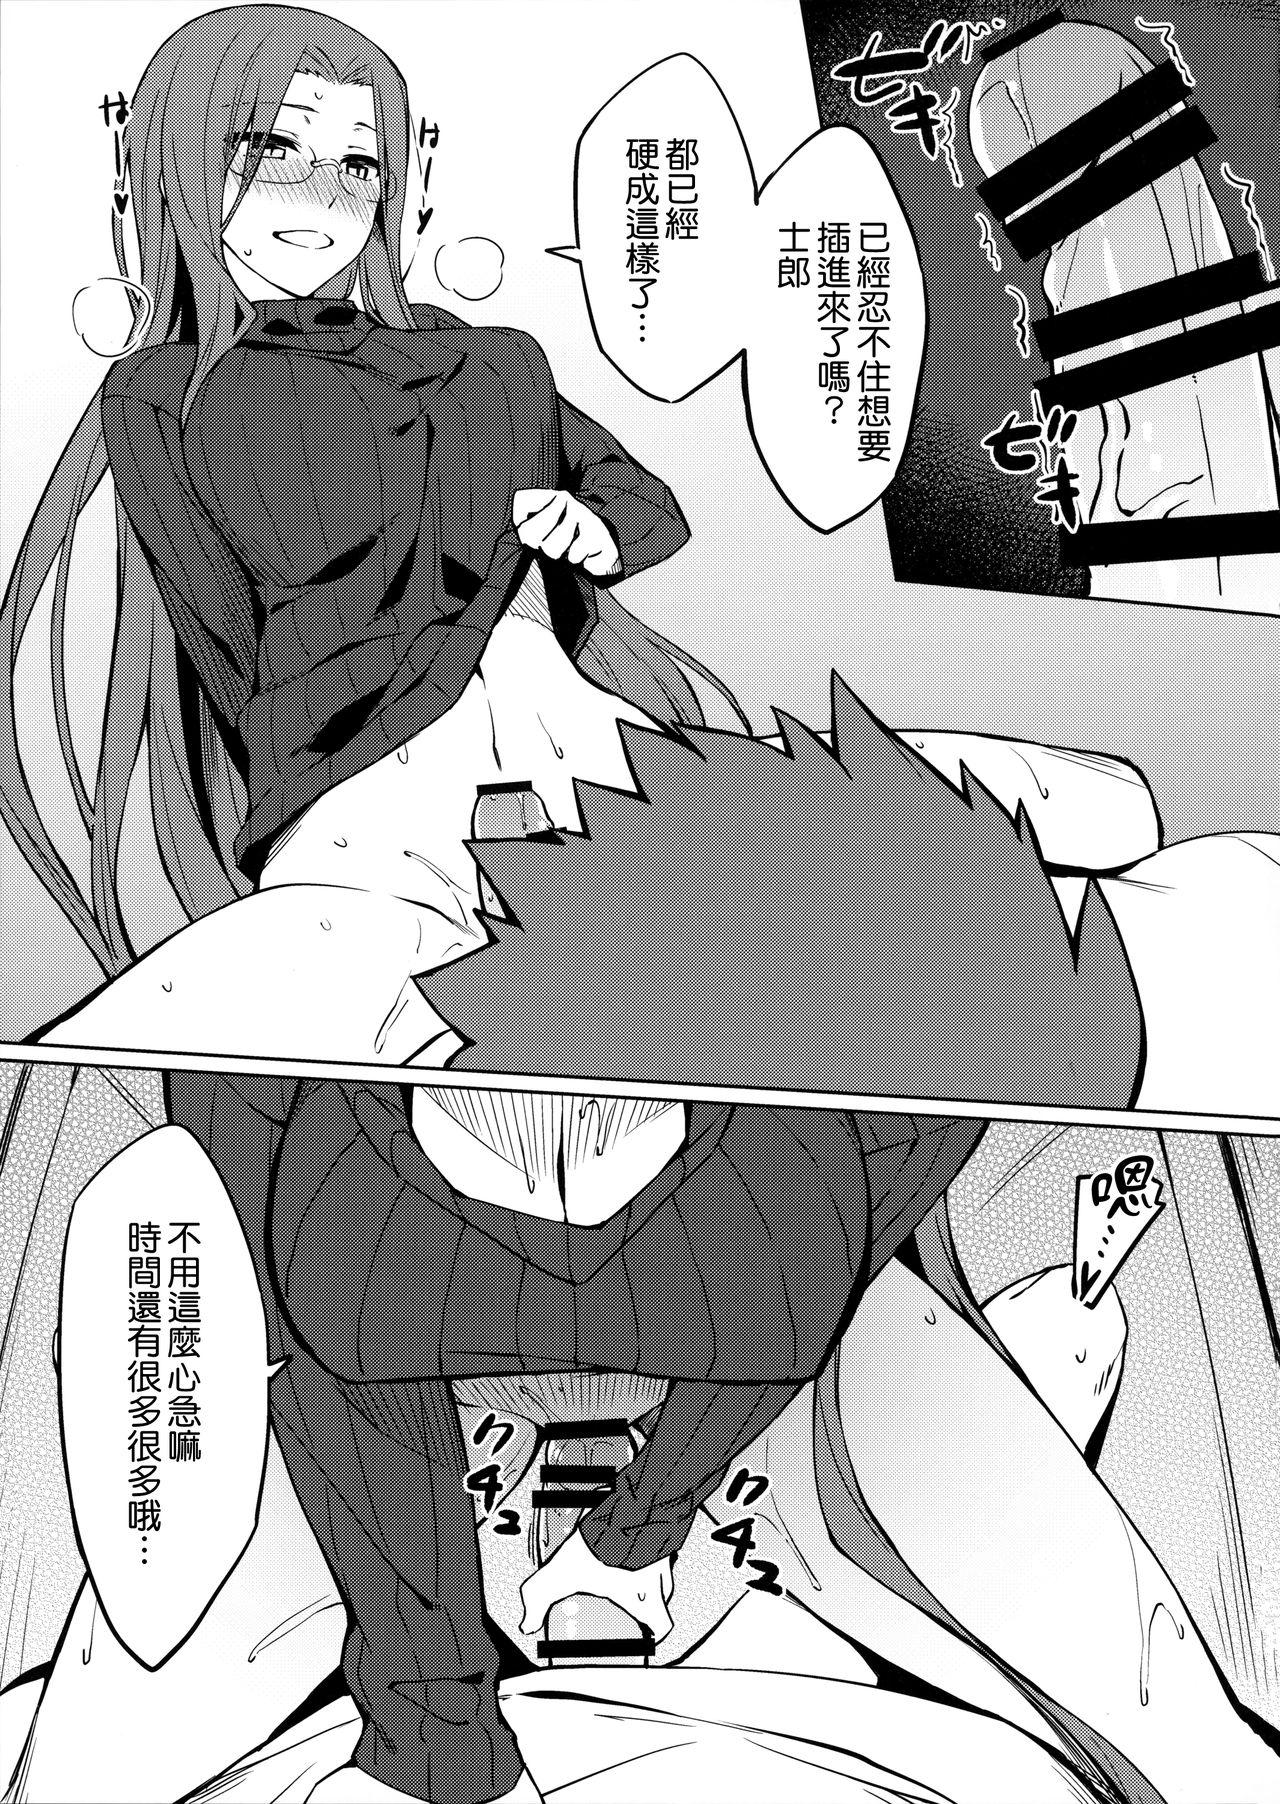 Group Rider-san to no Ichinichi. - Fate stay night Sixtynine - Page 9